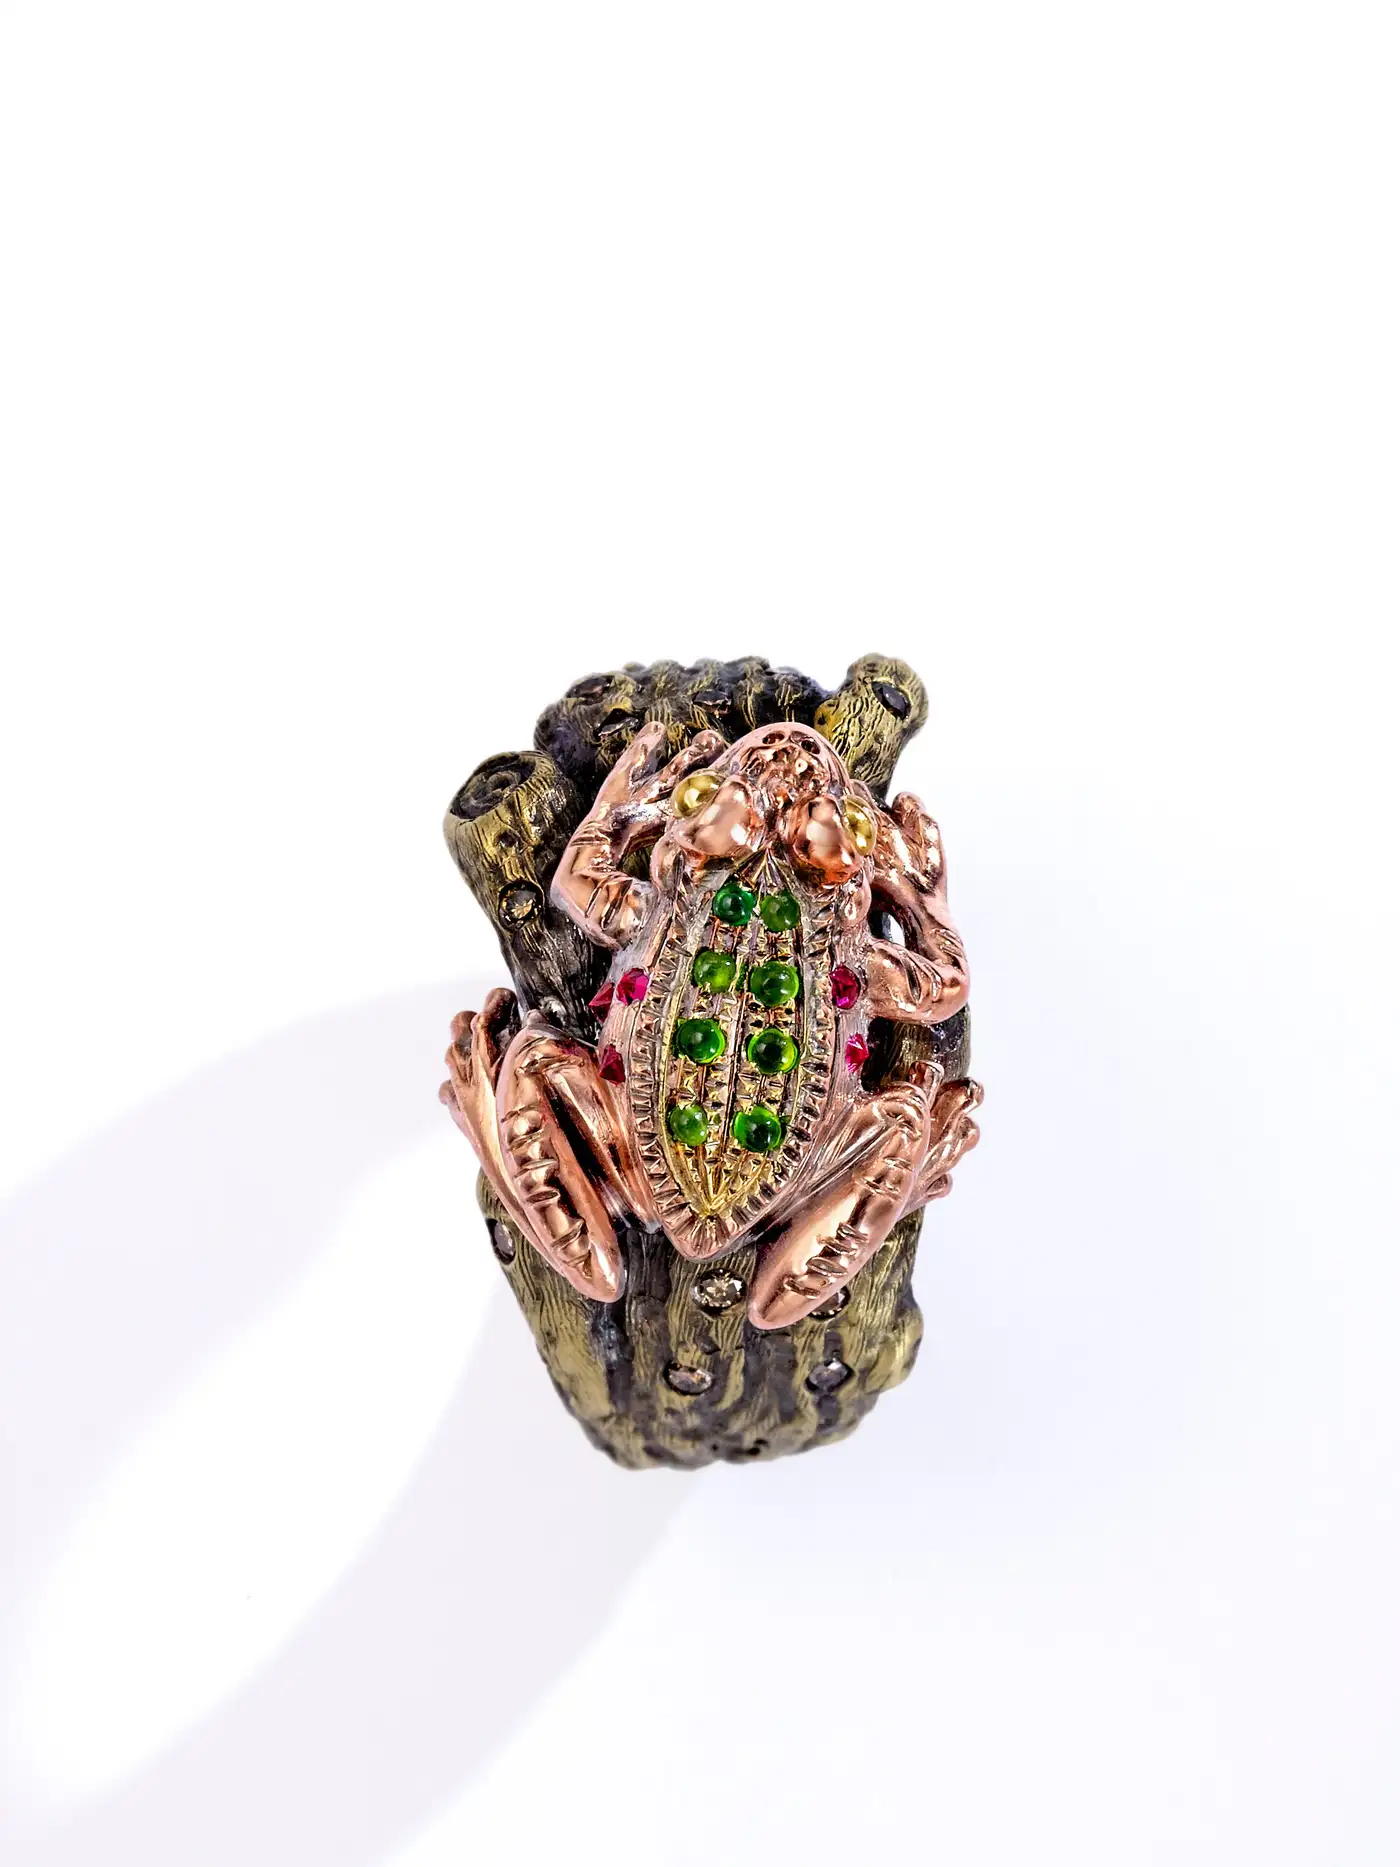 Wendy-Brandes-7-Ring-Diamond-and-Coloured-Gemstone-Animal-Design-Collection-19.webp